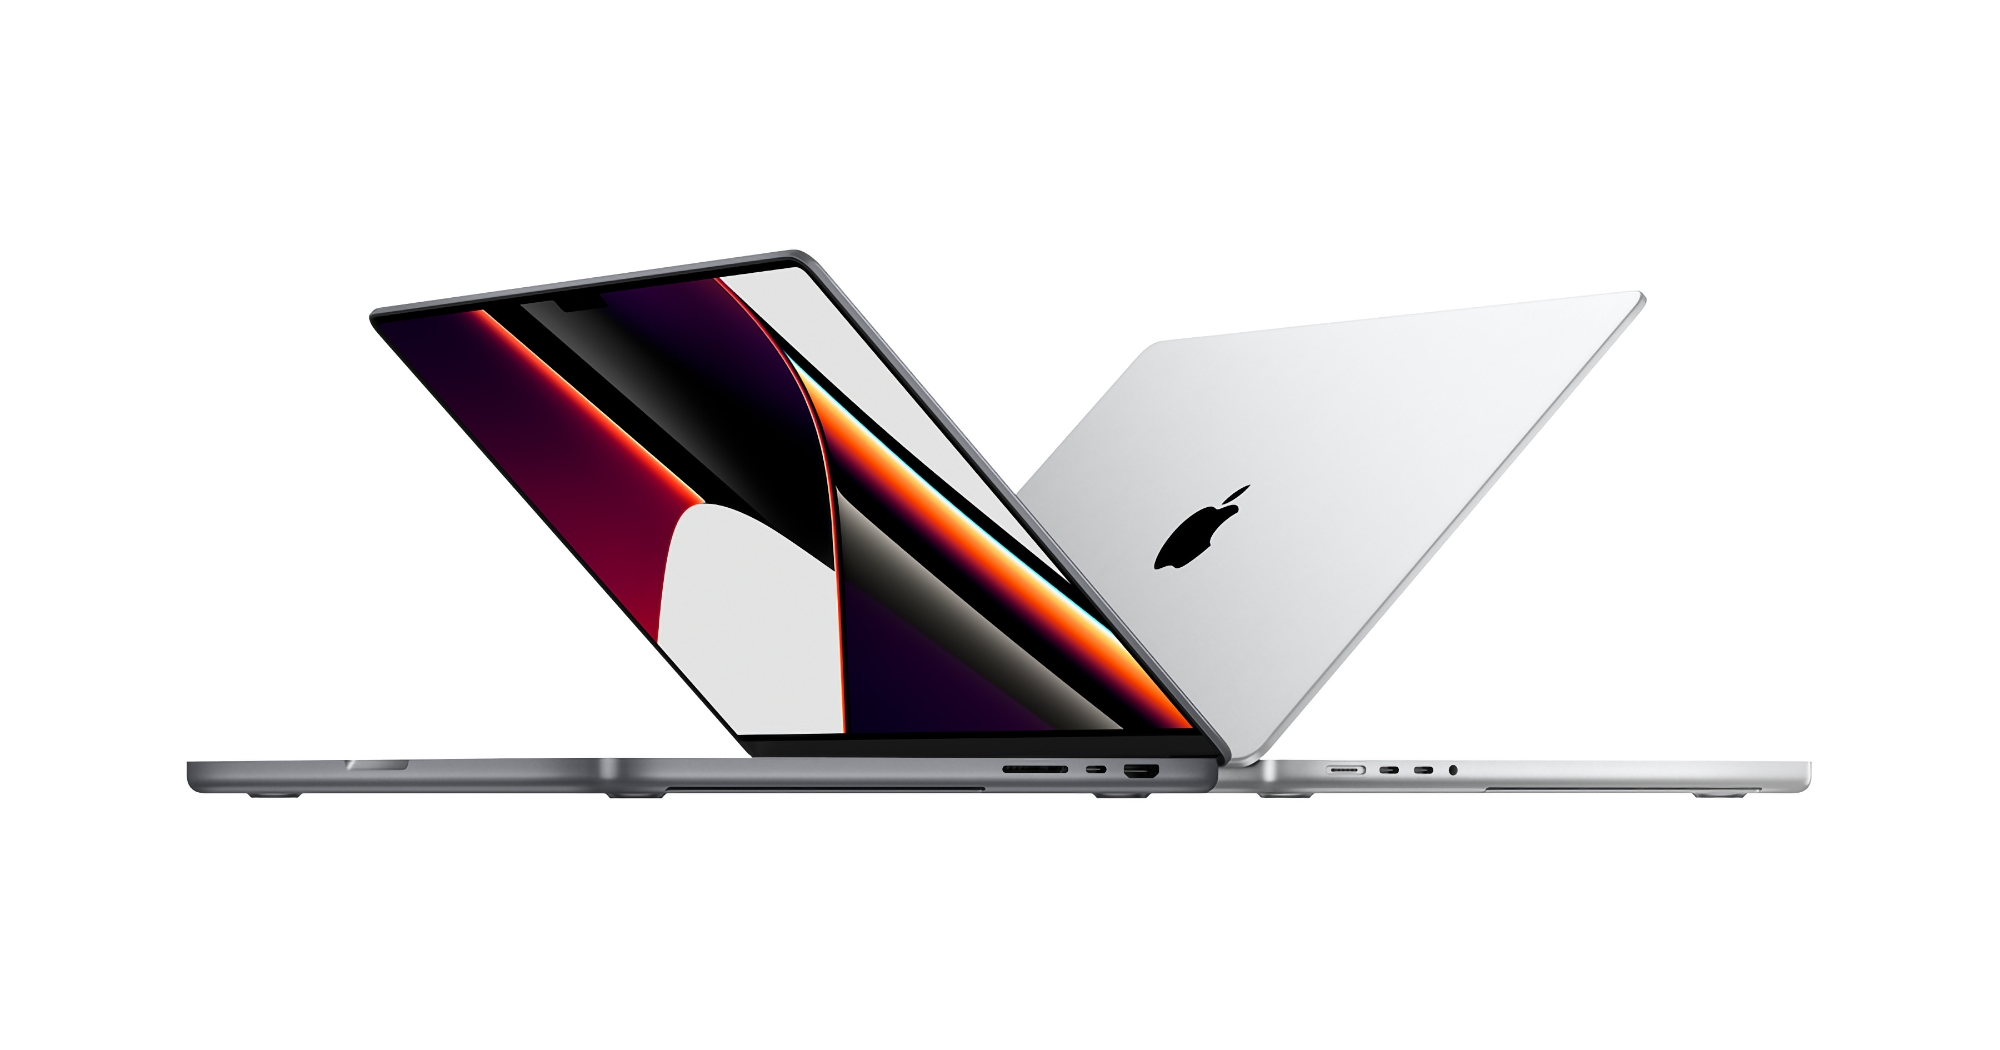 Apple lowered prices on refurbished MacBook Pro with M1 Pro and M1 Max chips, laptops now cost 15% less than new models